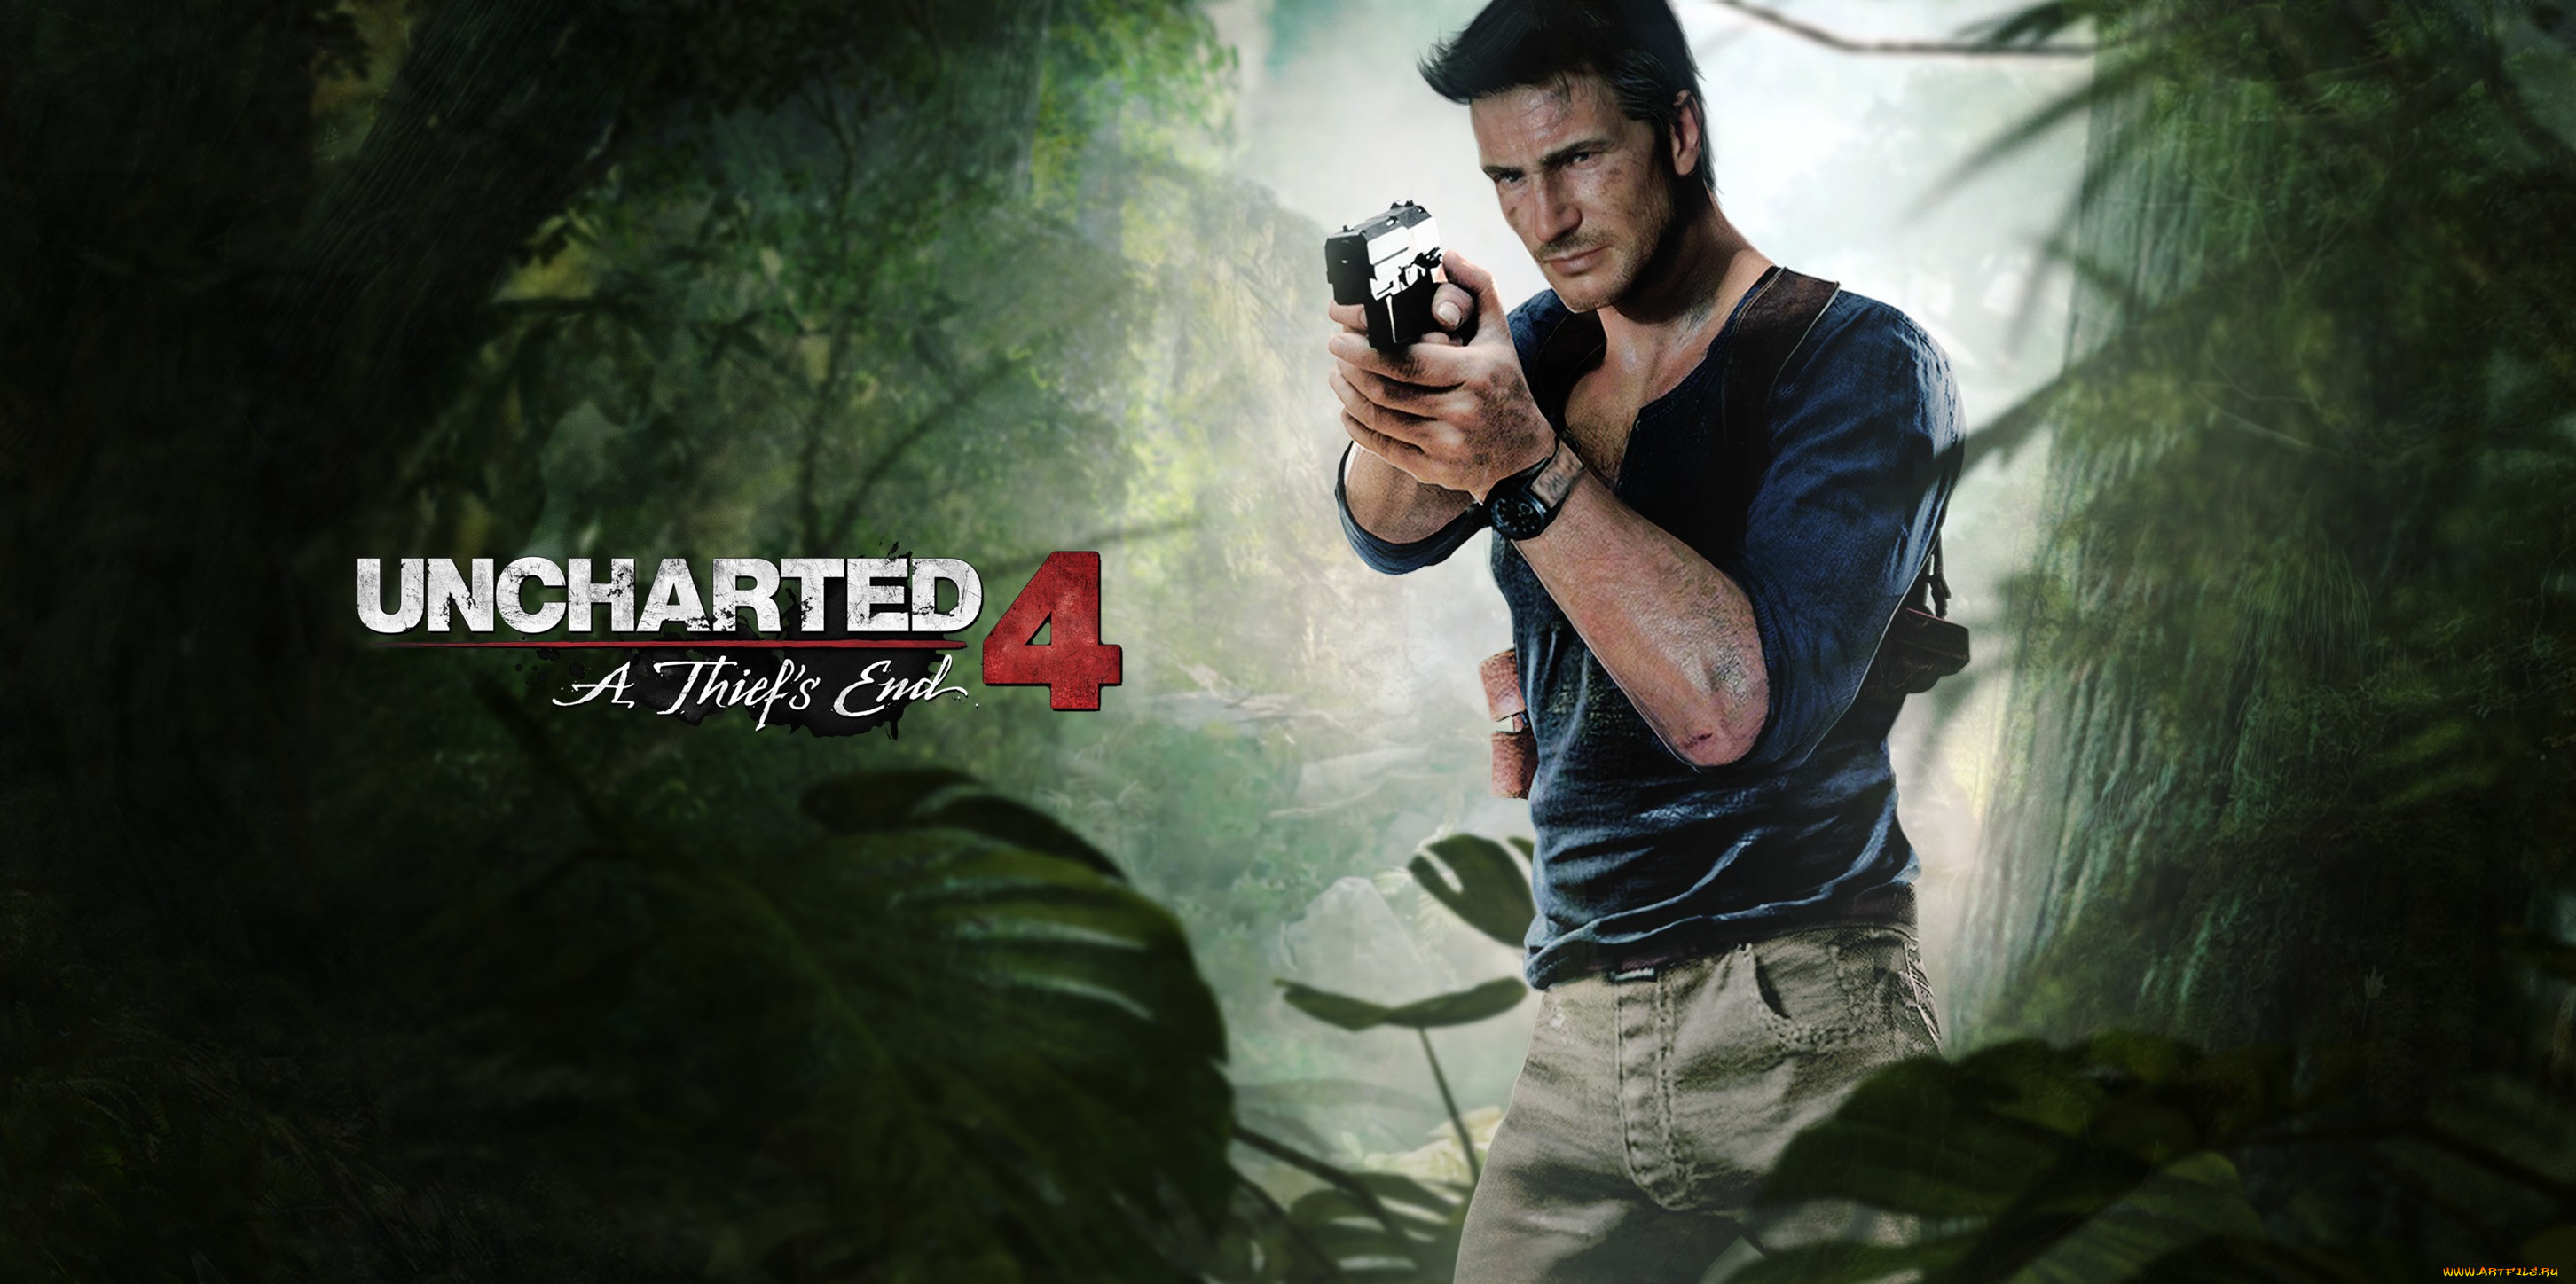  , uncharted 4,  a thief`s end, ps4, uncharted, 4, a, thief's, end, naughty, dog, game, nathan, drake, fan, art, , playstation, 